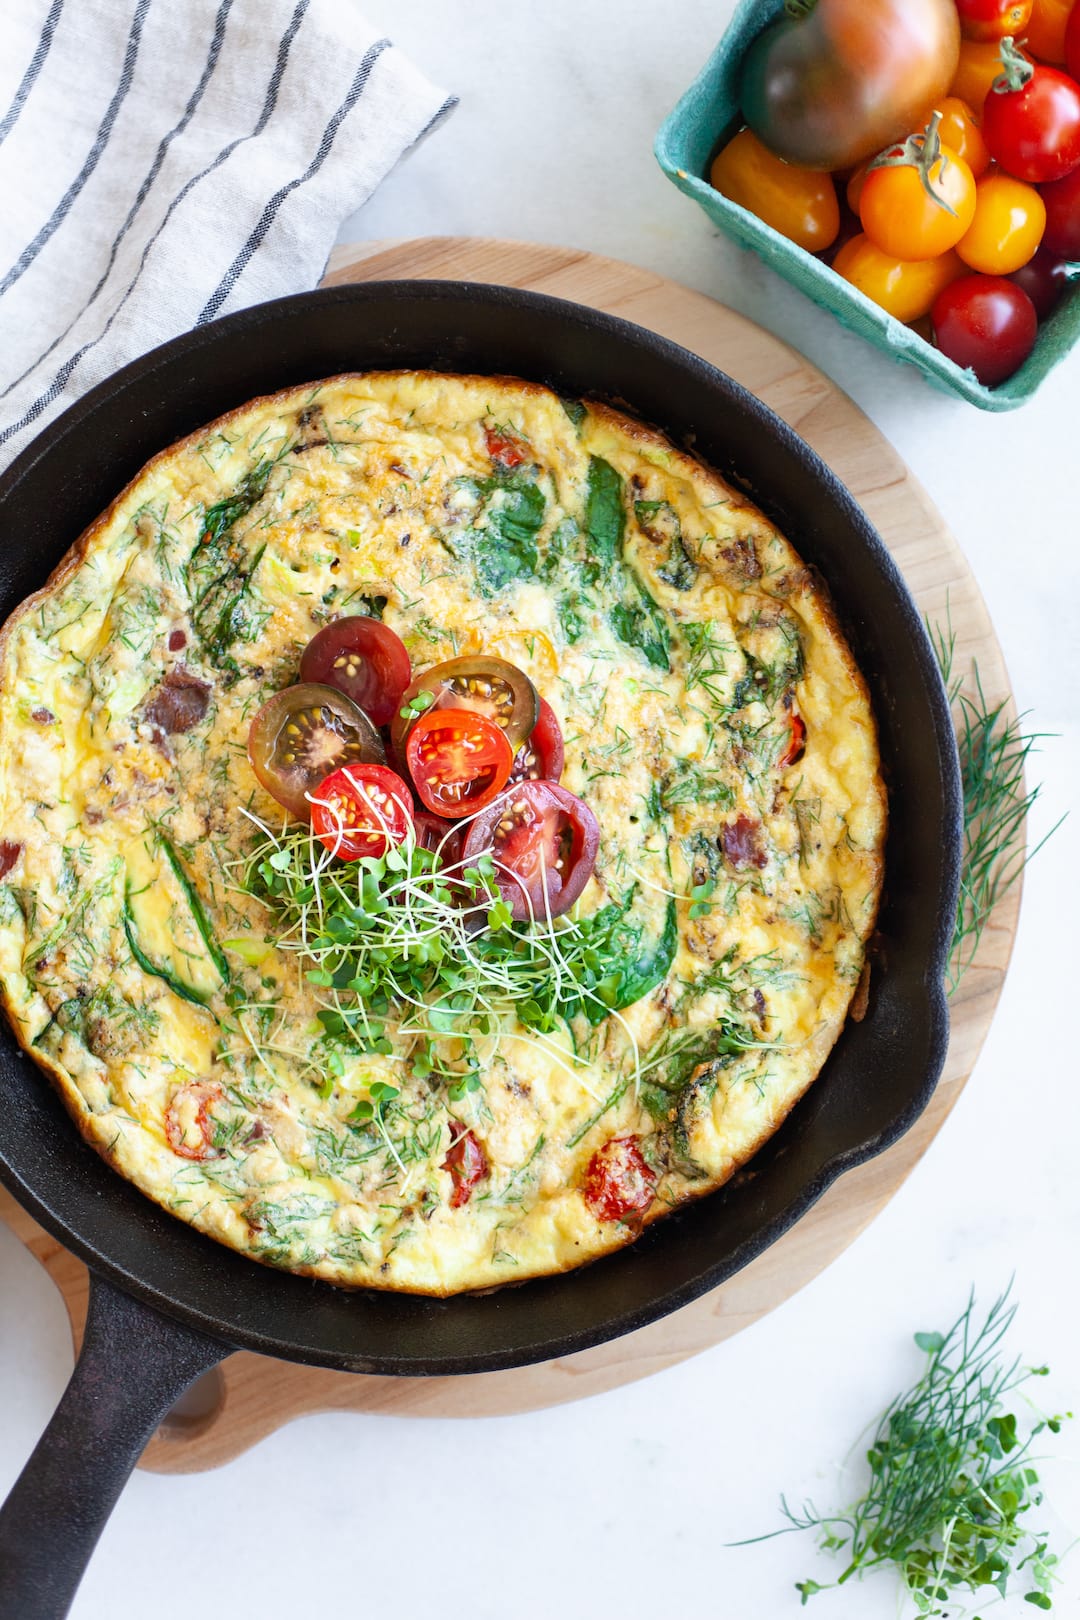 Baked frittata in a black skillet with vegetables